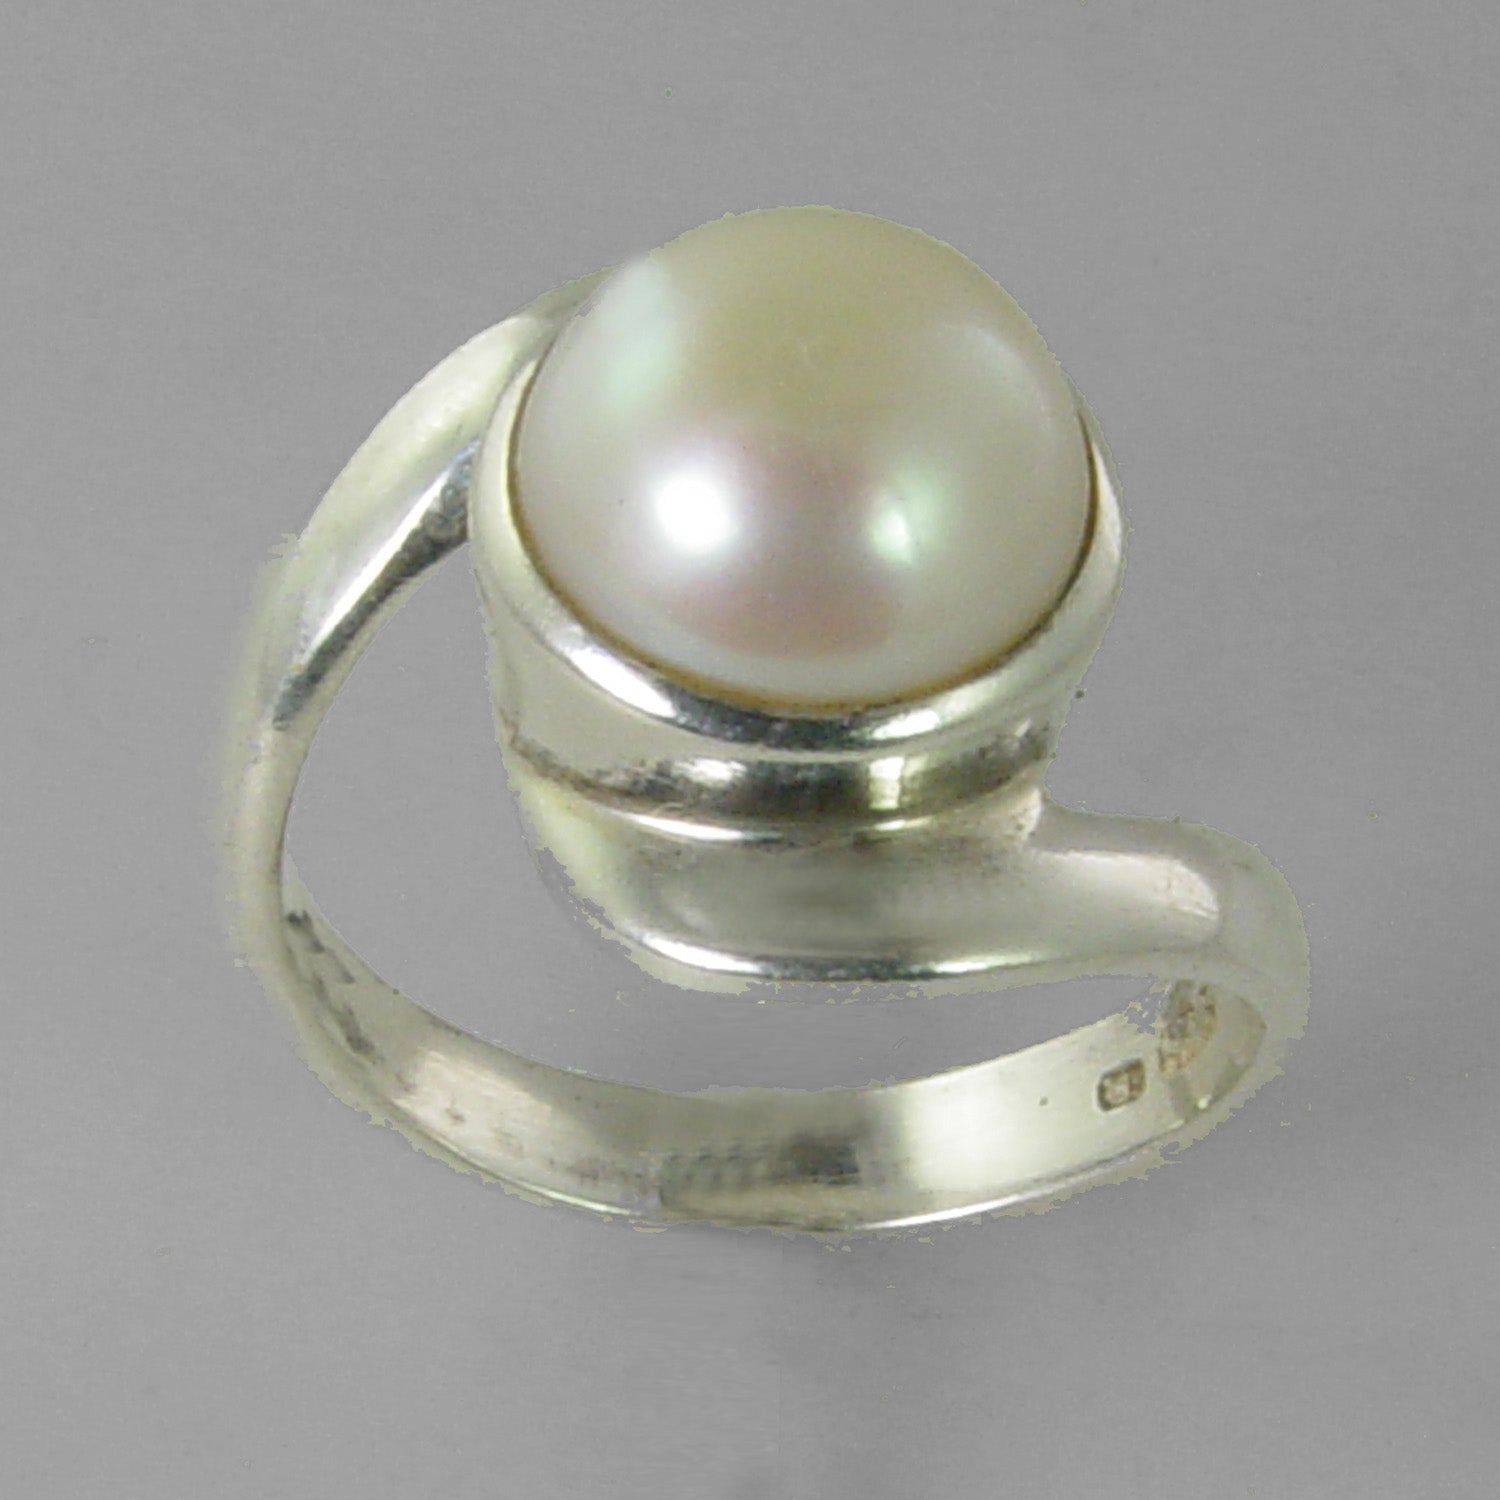 Pearl 5 ct Freshwater Pearl Bezel Bypass Set Sterling Silver Ring, Size 8.5